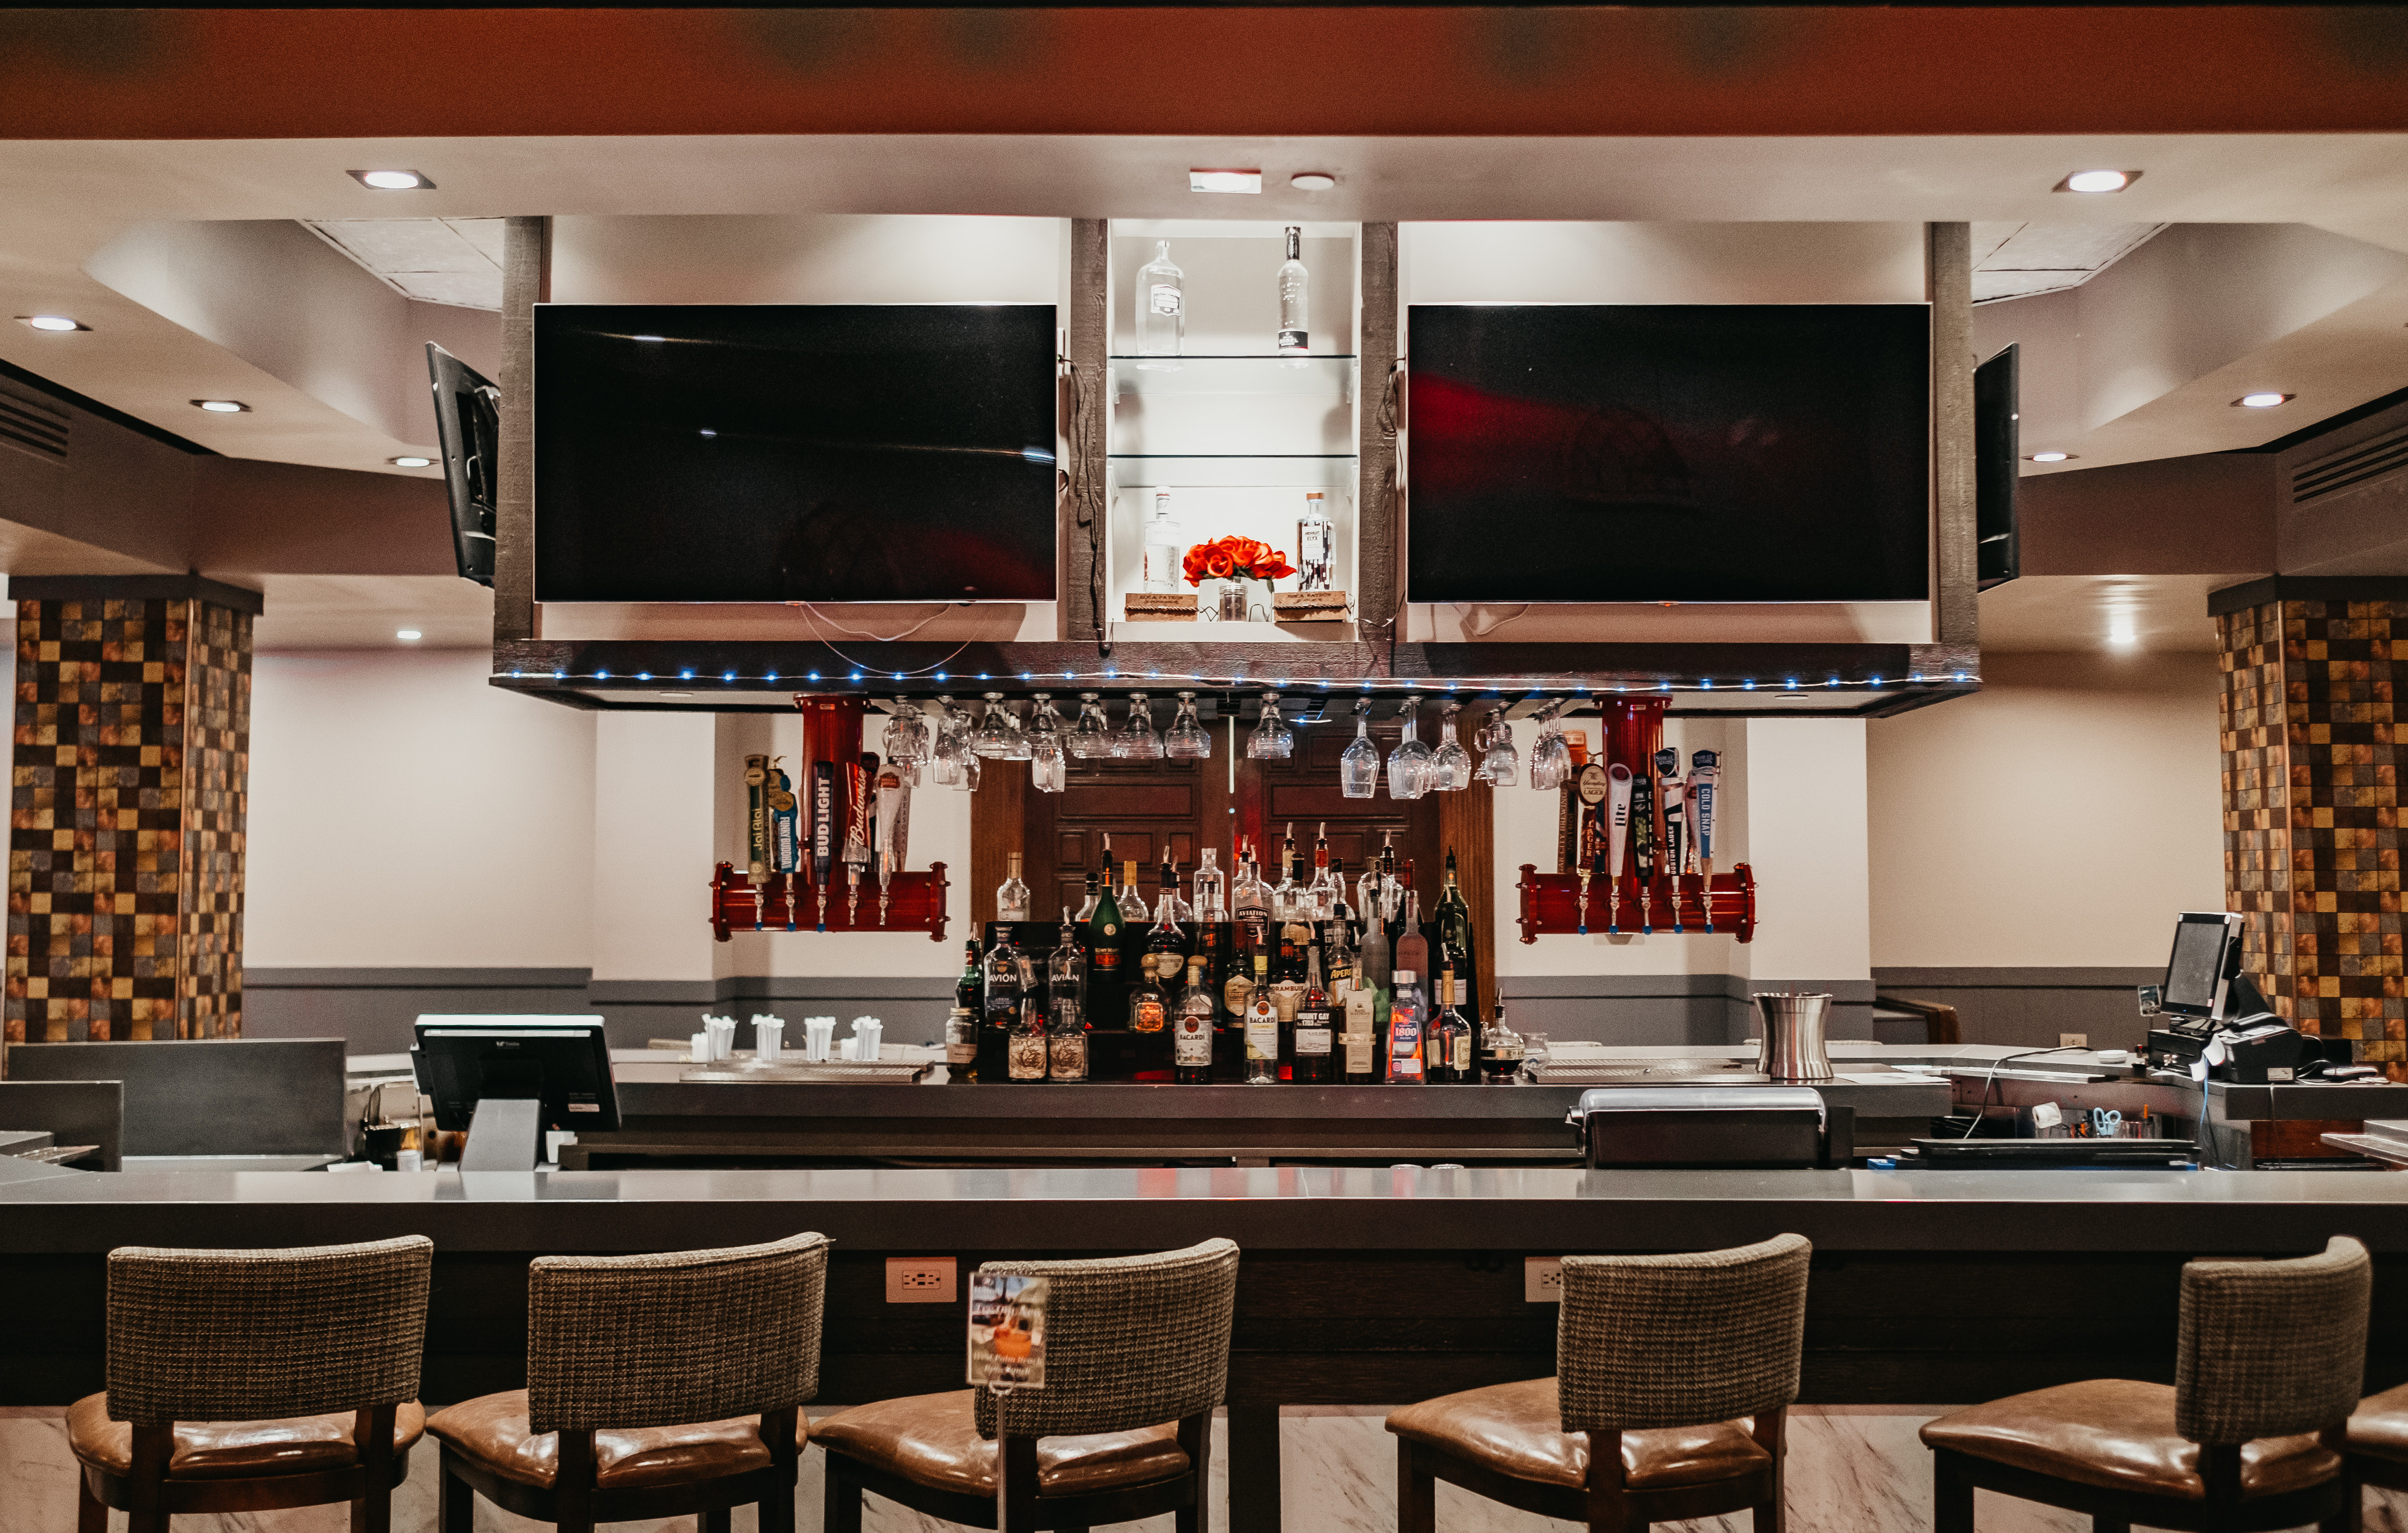 Bar area with stools and TV